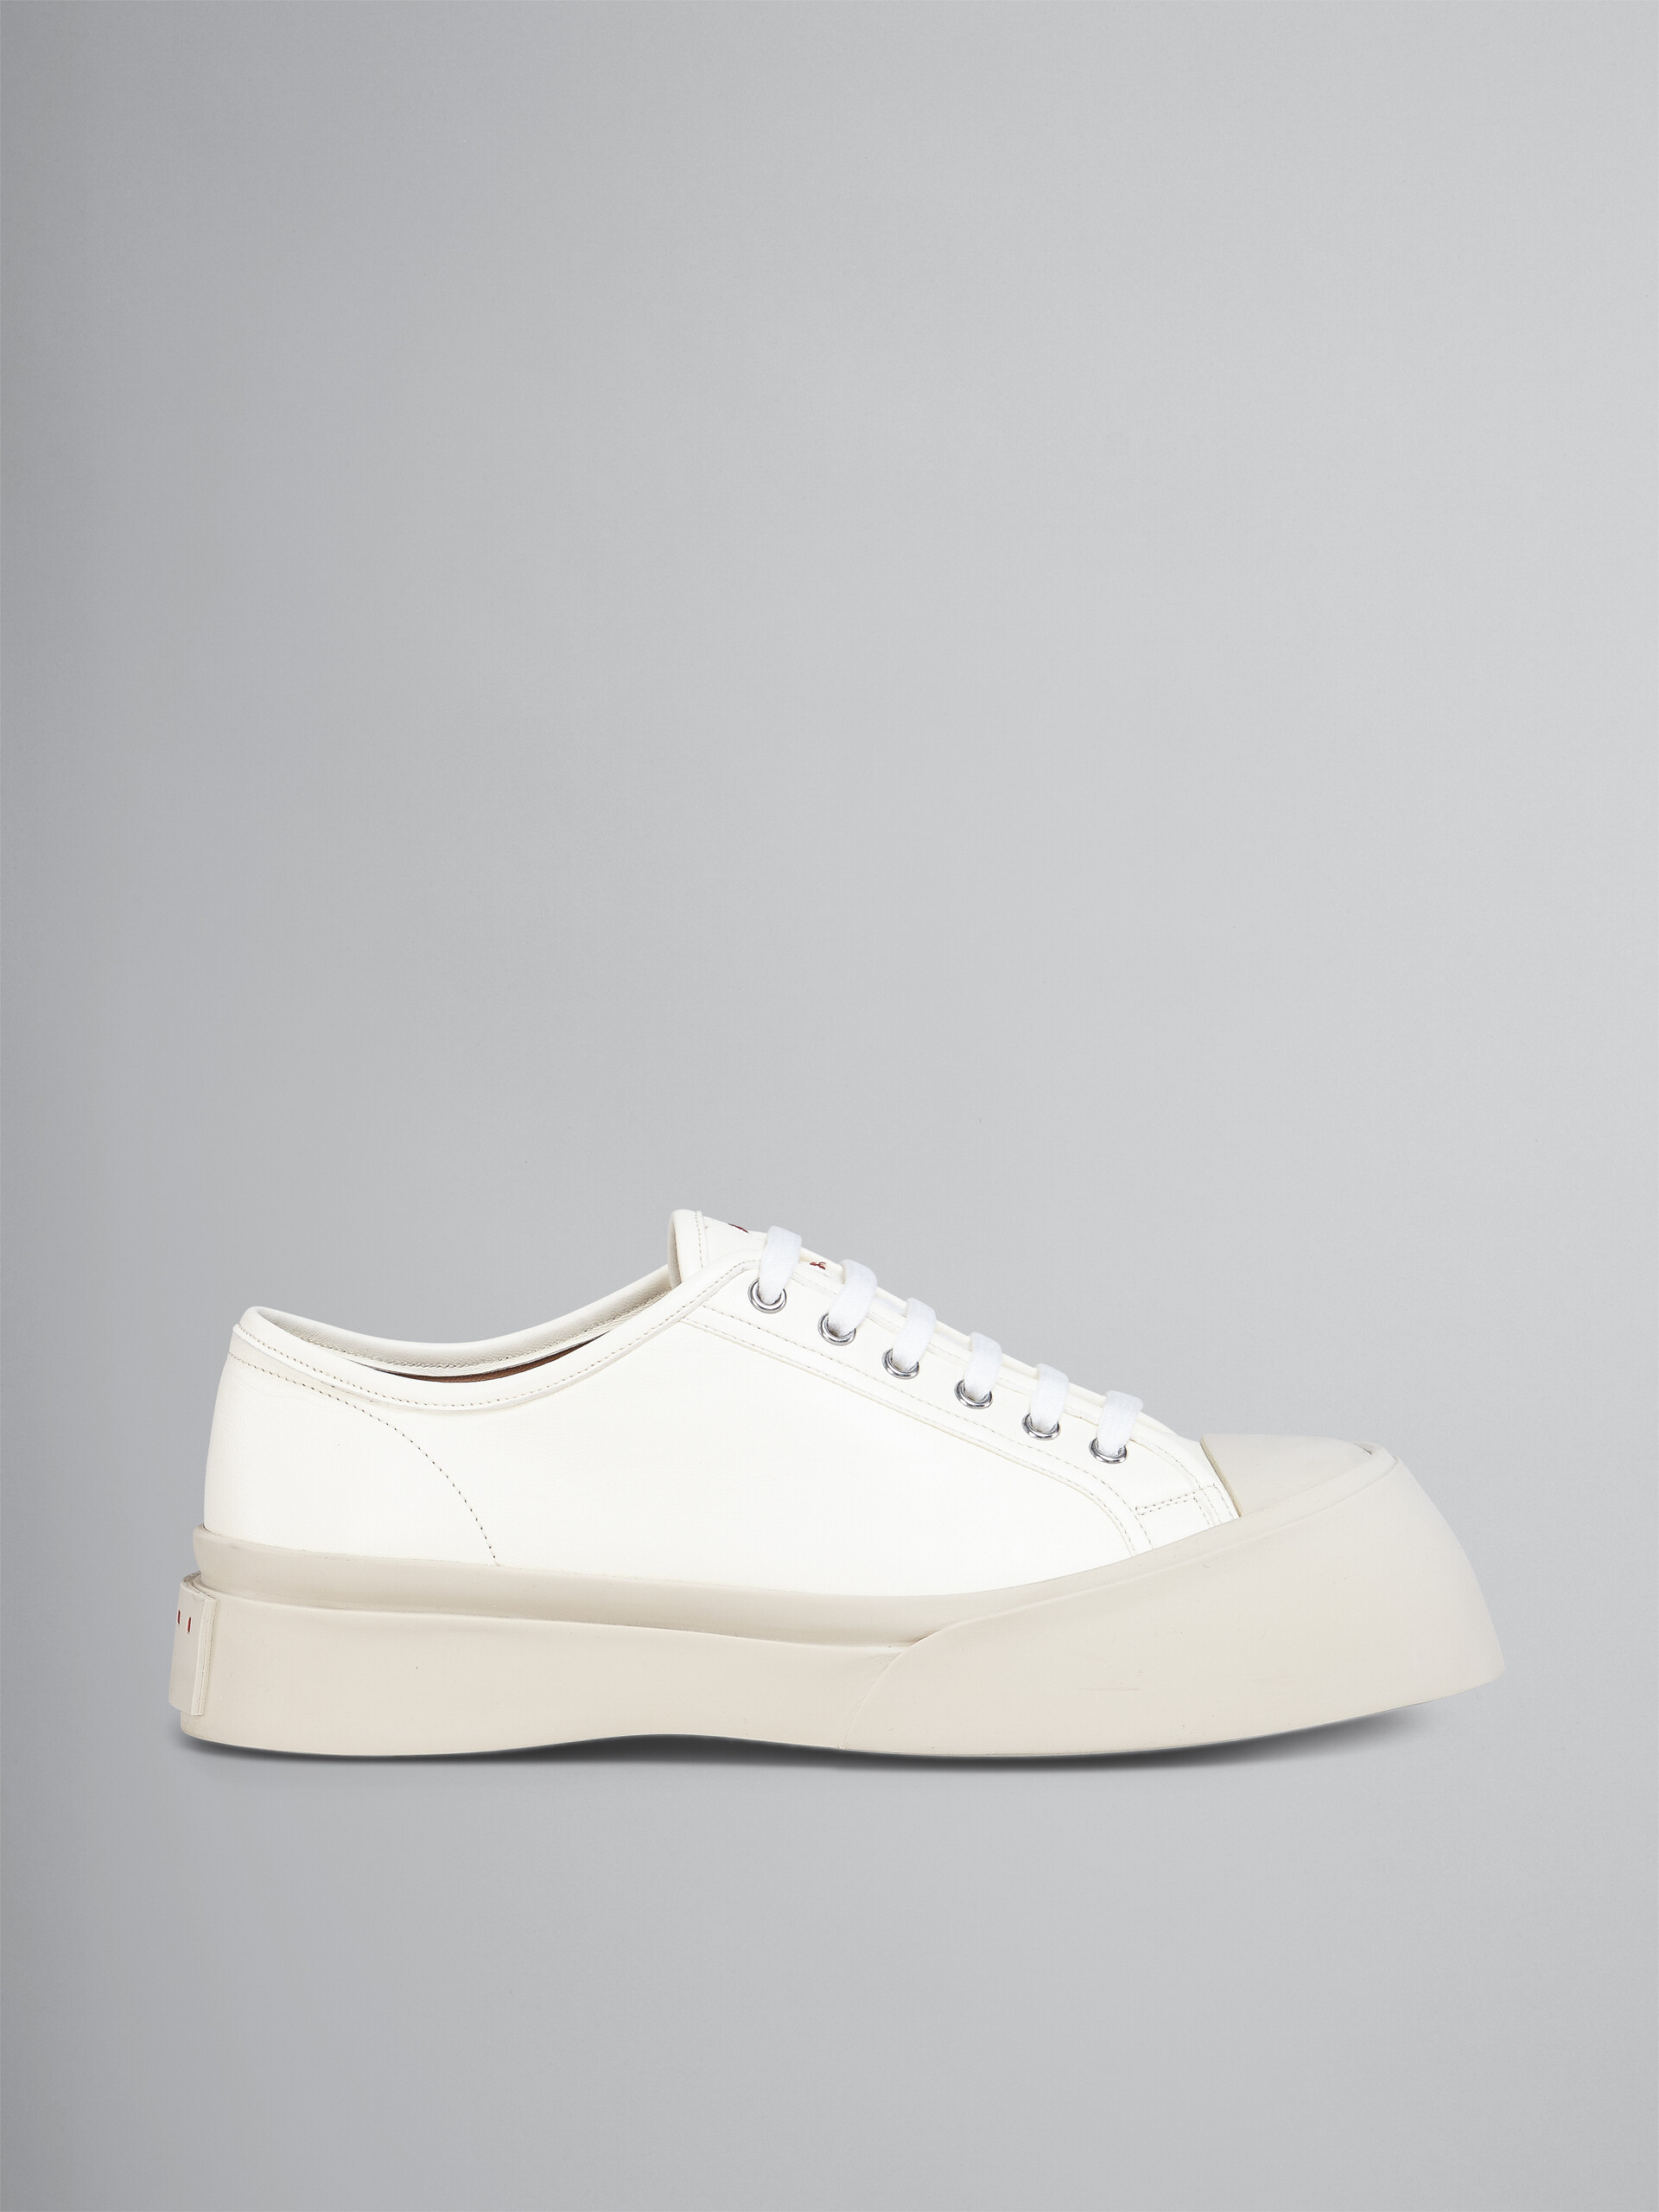 White soft calf leather PABLO sneaker - Sneakers - Image 1